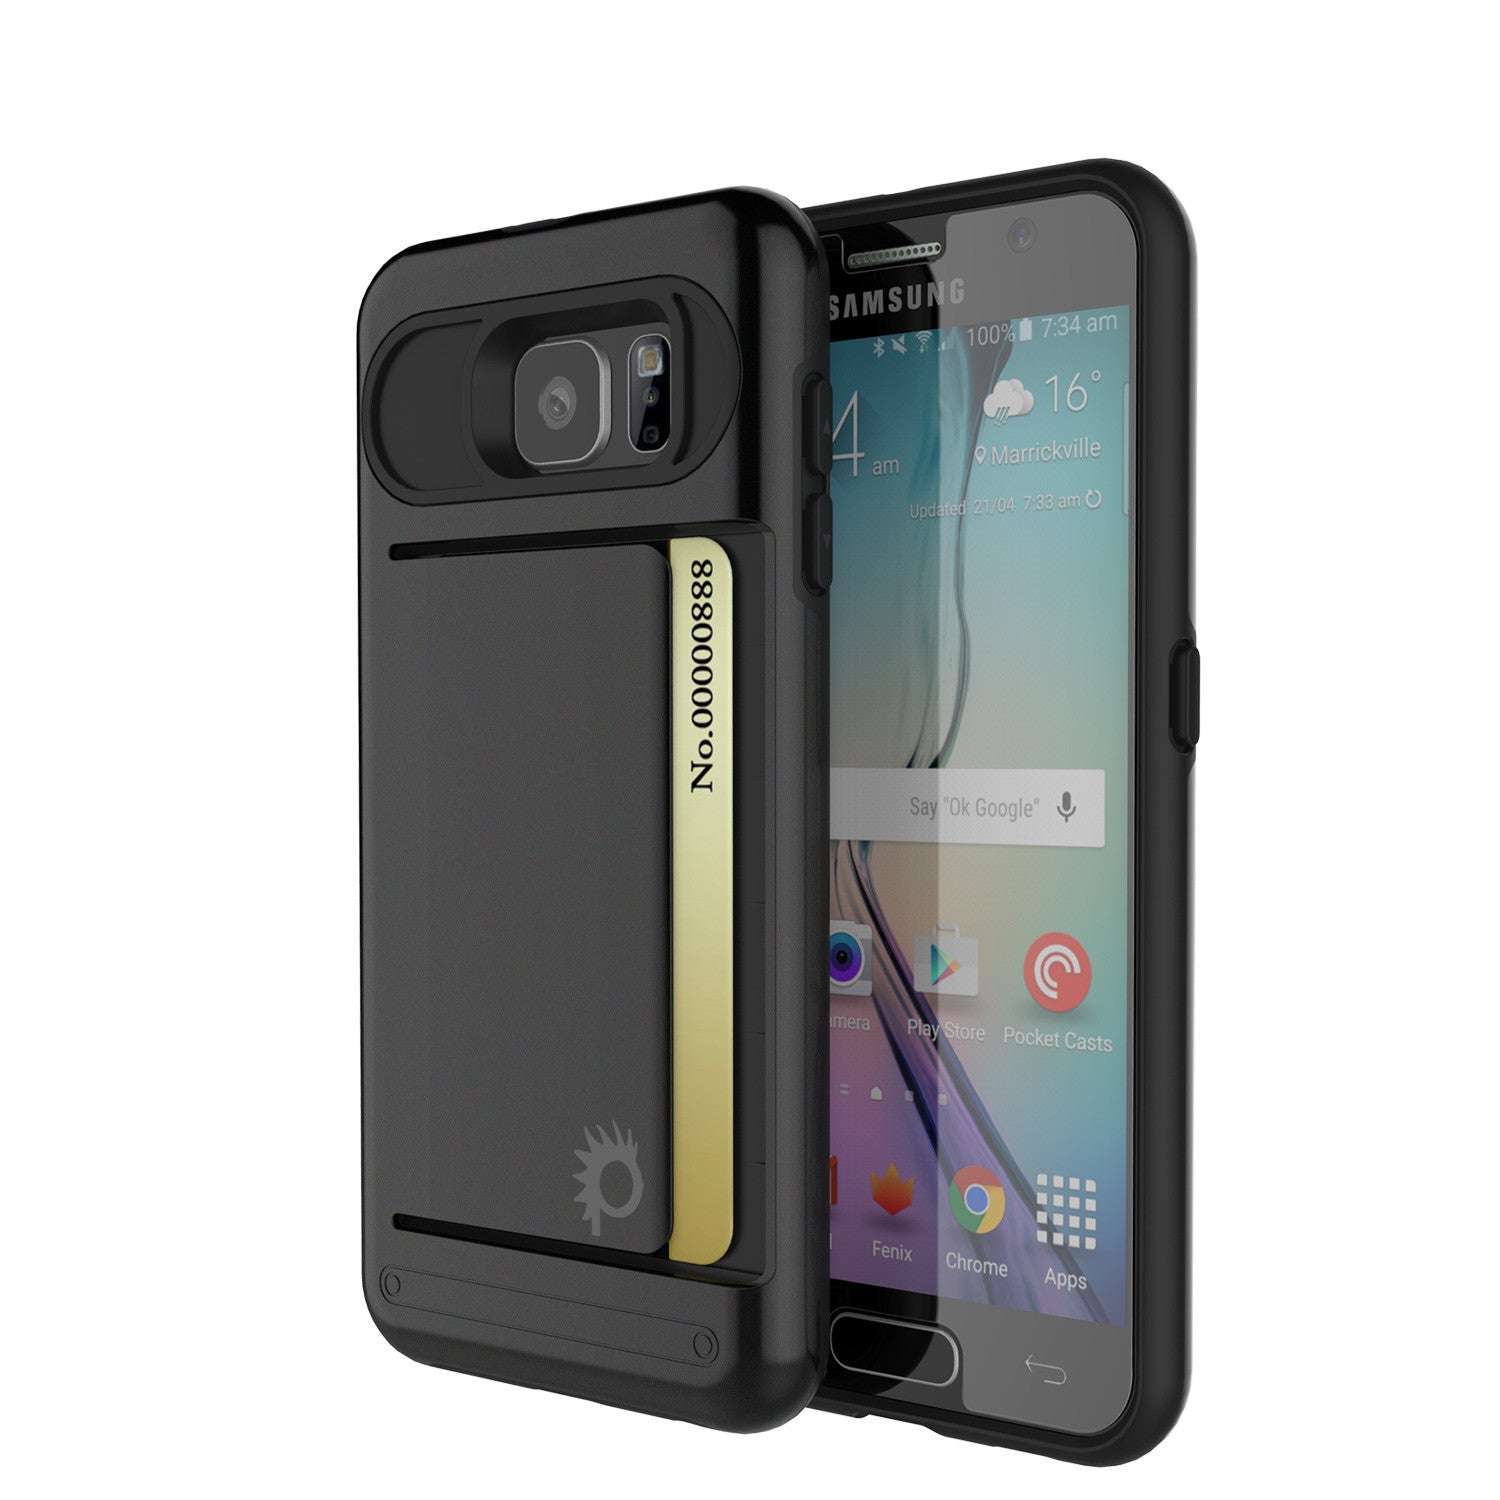 Galaxy s6 Case PunkCase CLUTCH Black Series Slim Armor Soft Cover Case w/ Tempered Glass (Color in image: Black)